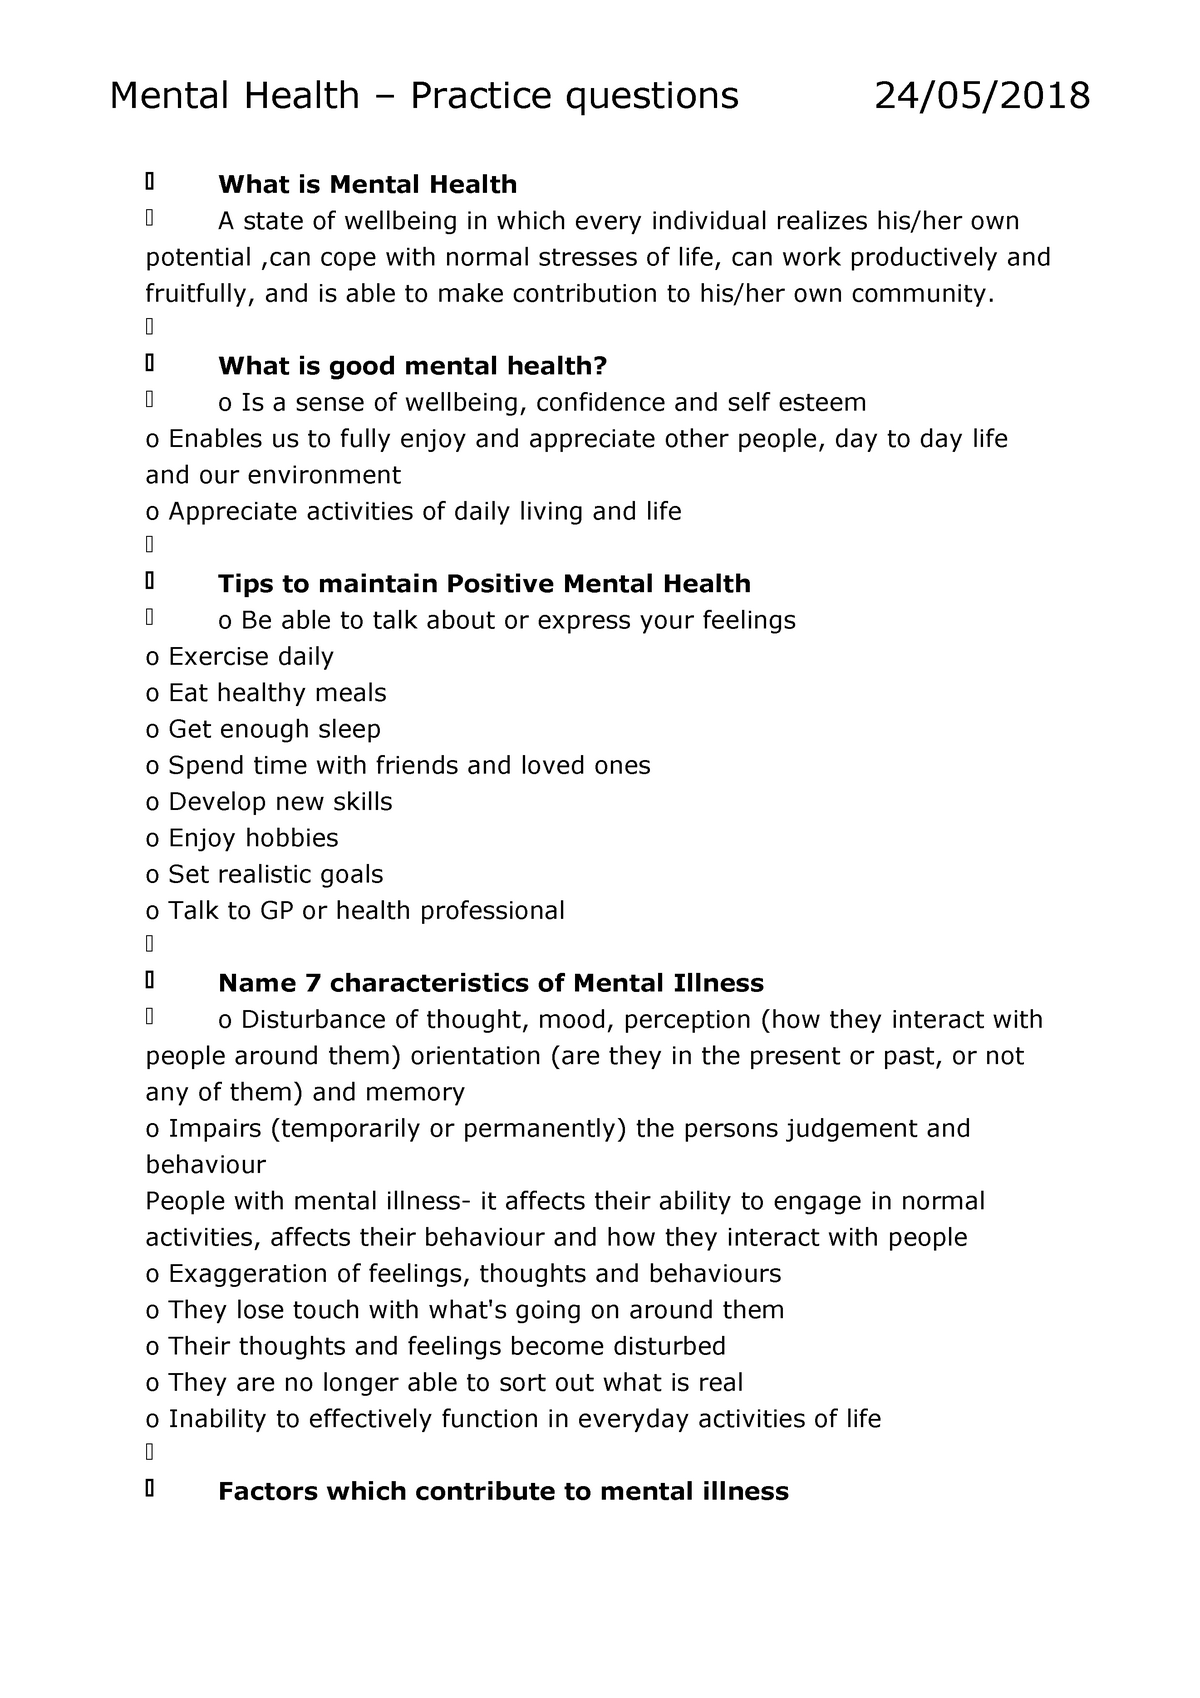 examples of research questions in mental health